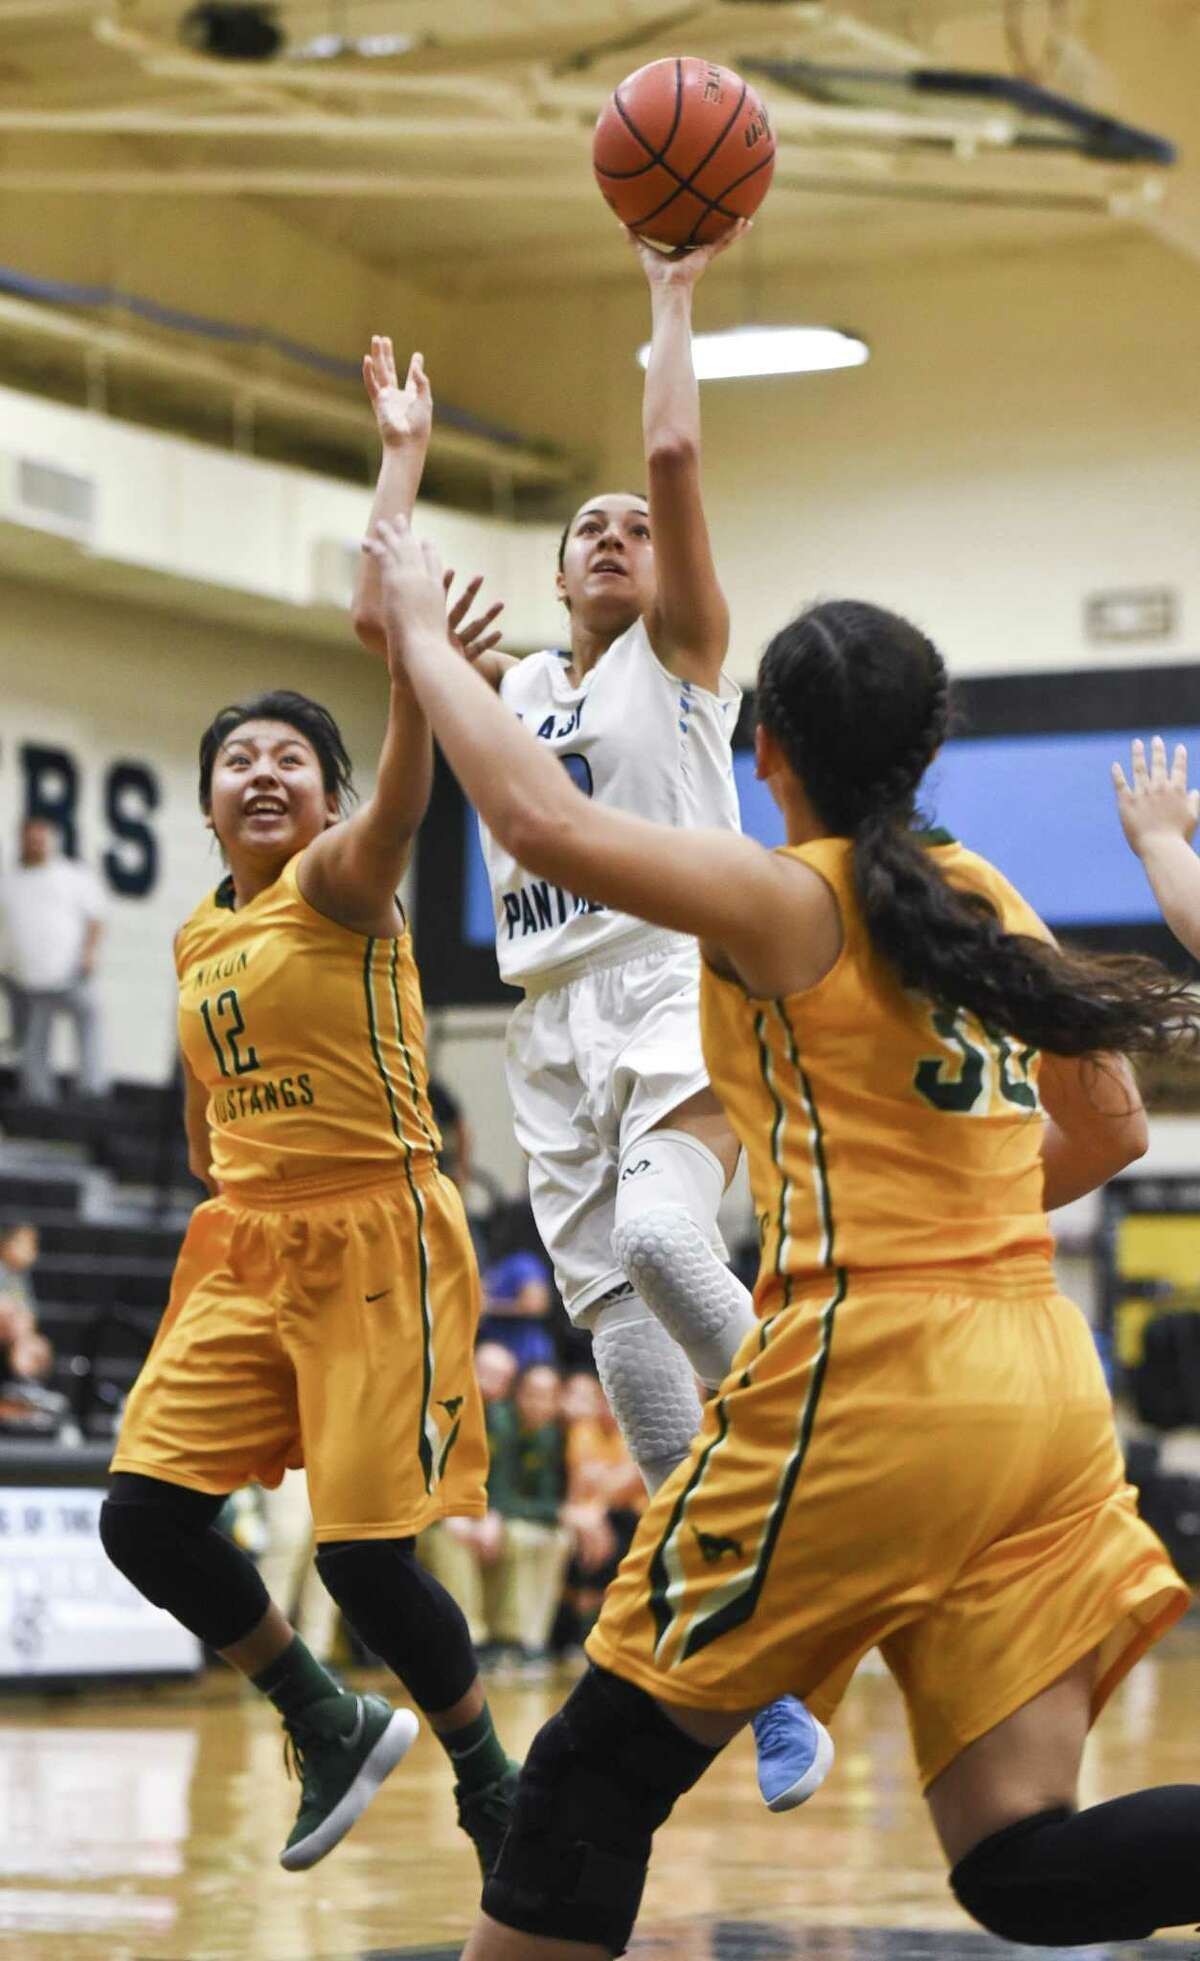 United South’s Karla Serna scored 12 points as the Lady Panthers used home court advantage to win the Border Olympics Girls’ Basketball Tournament Saturday. They defeated Nixon 64-43 for the championship.